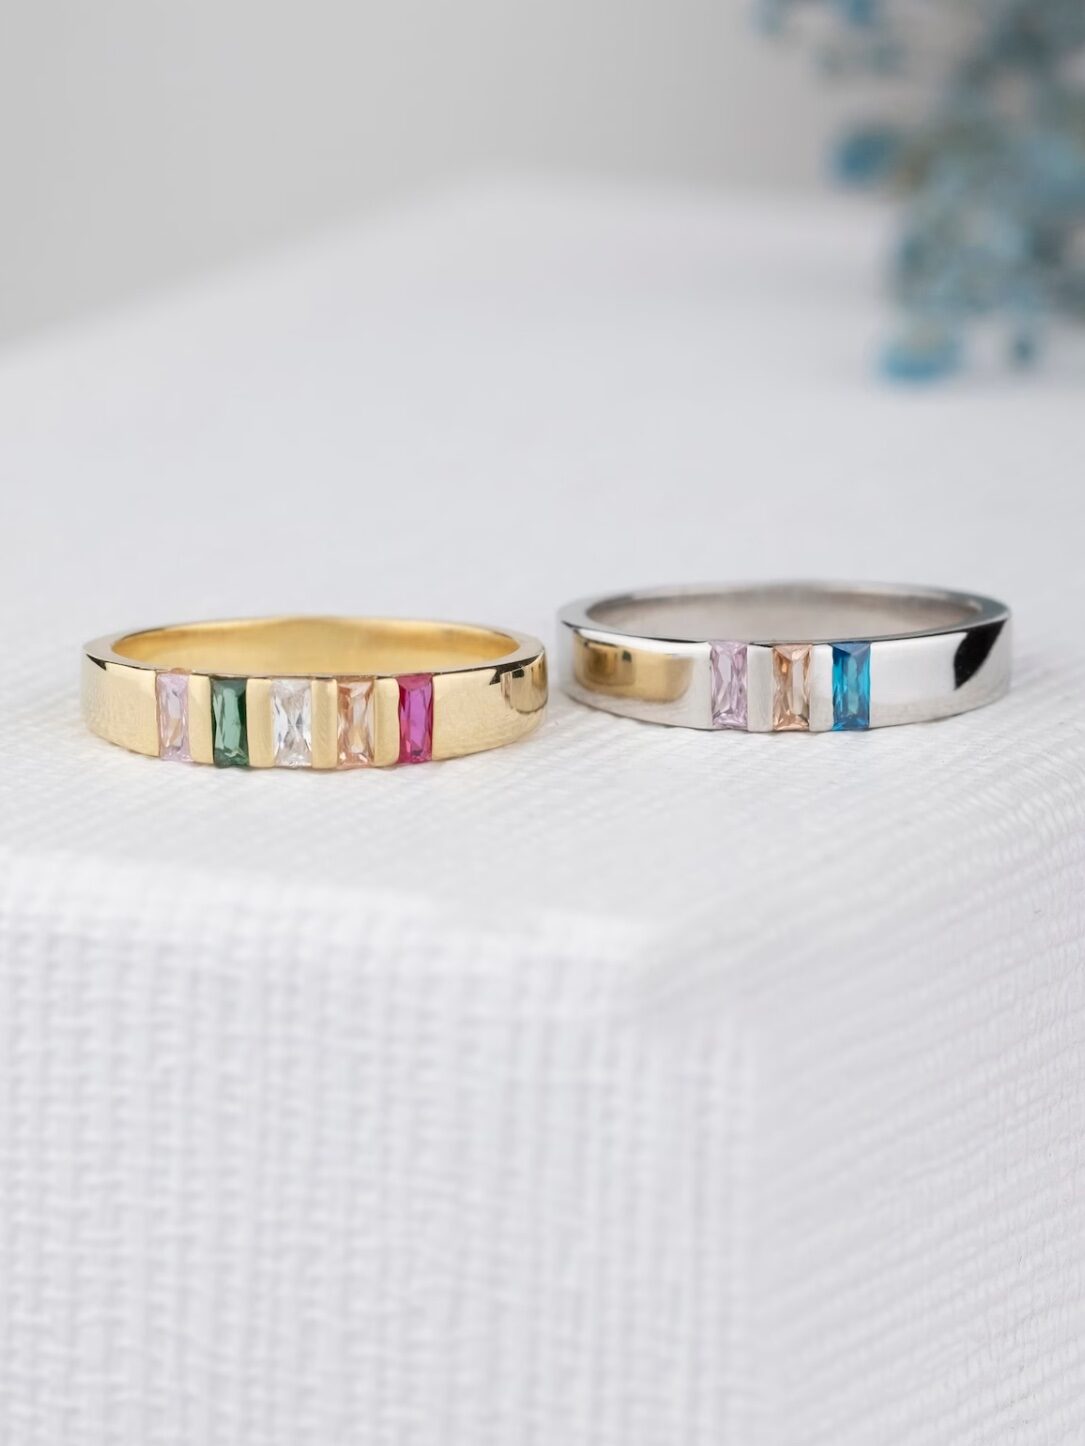 Gold and silver band rings with gemstones sit on a white surface